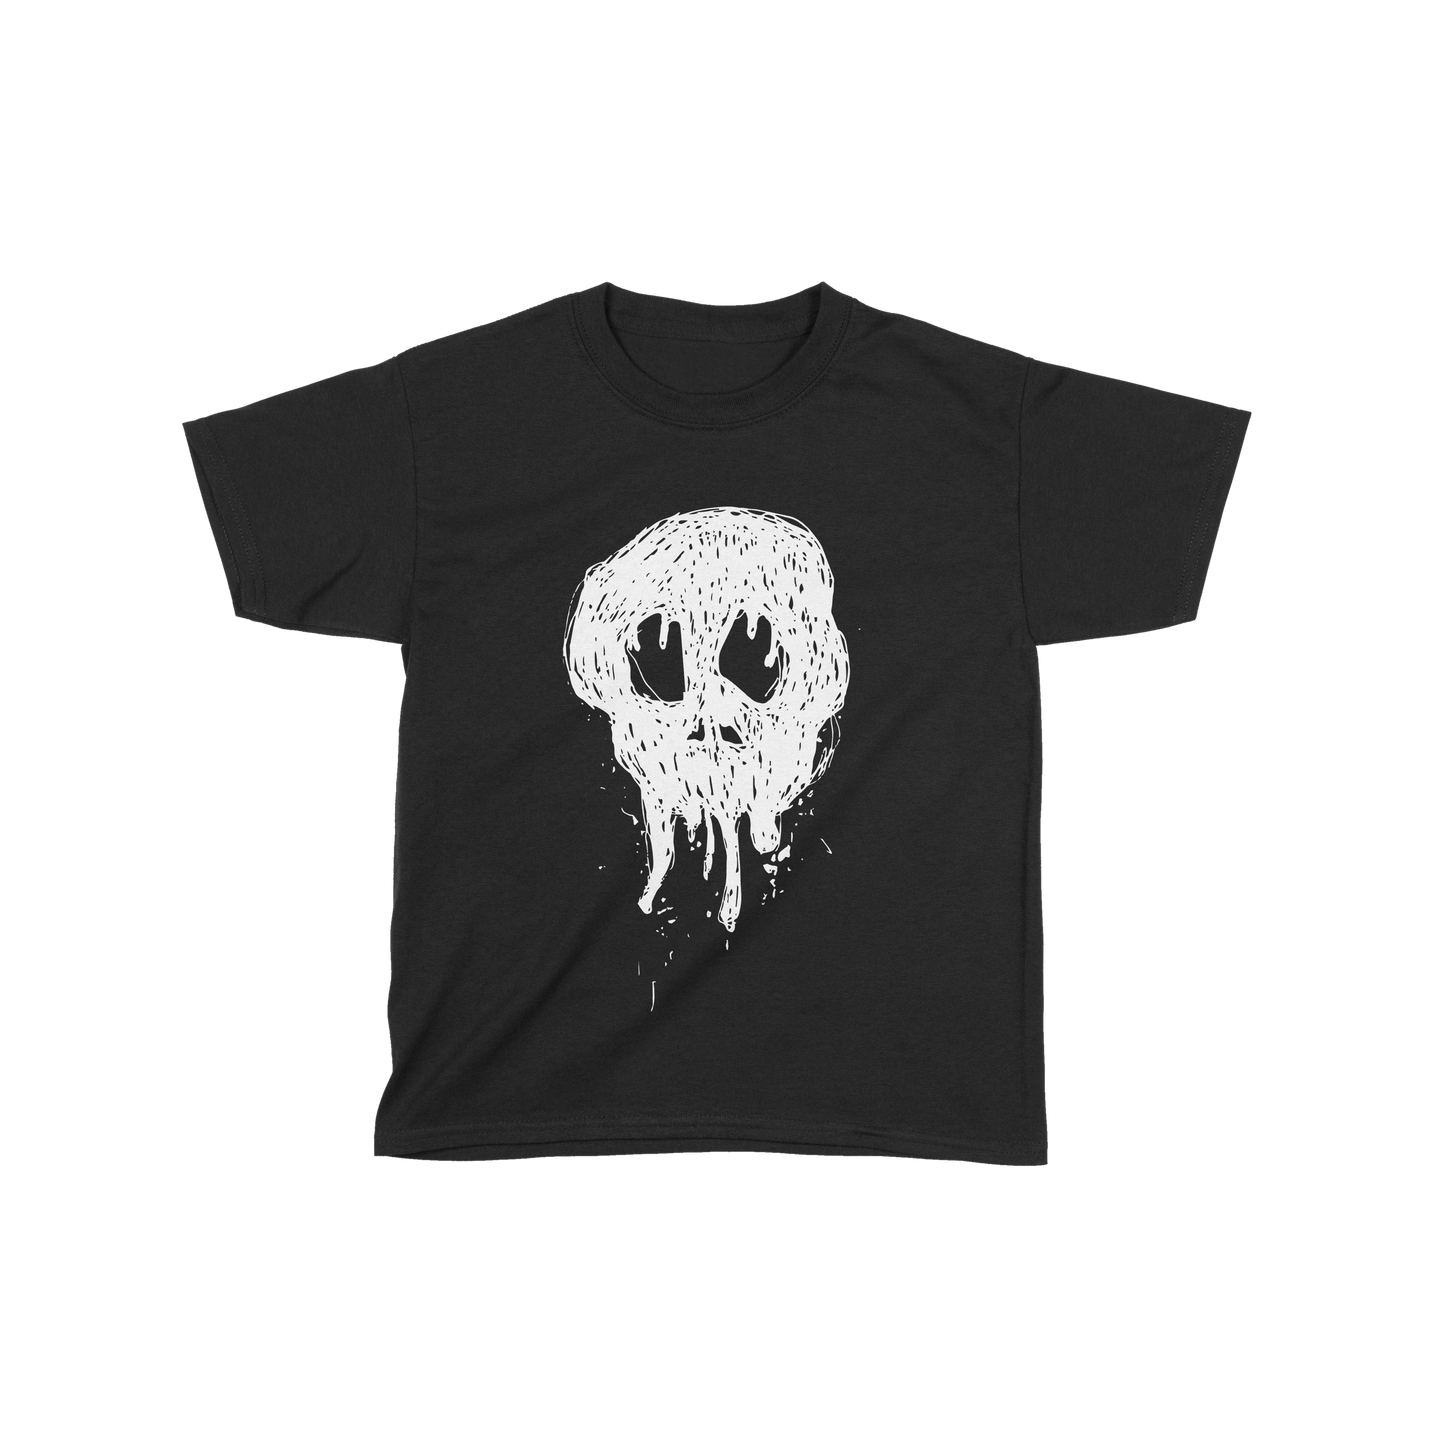 Kids Ace Skull - T-shirt (Hand Drawn by Ace)